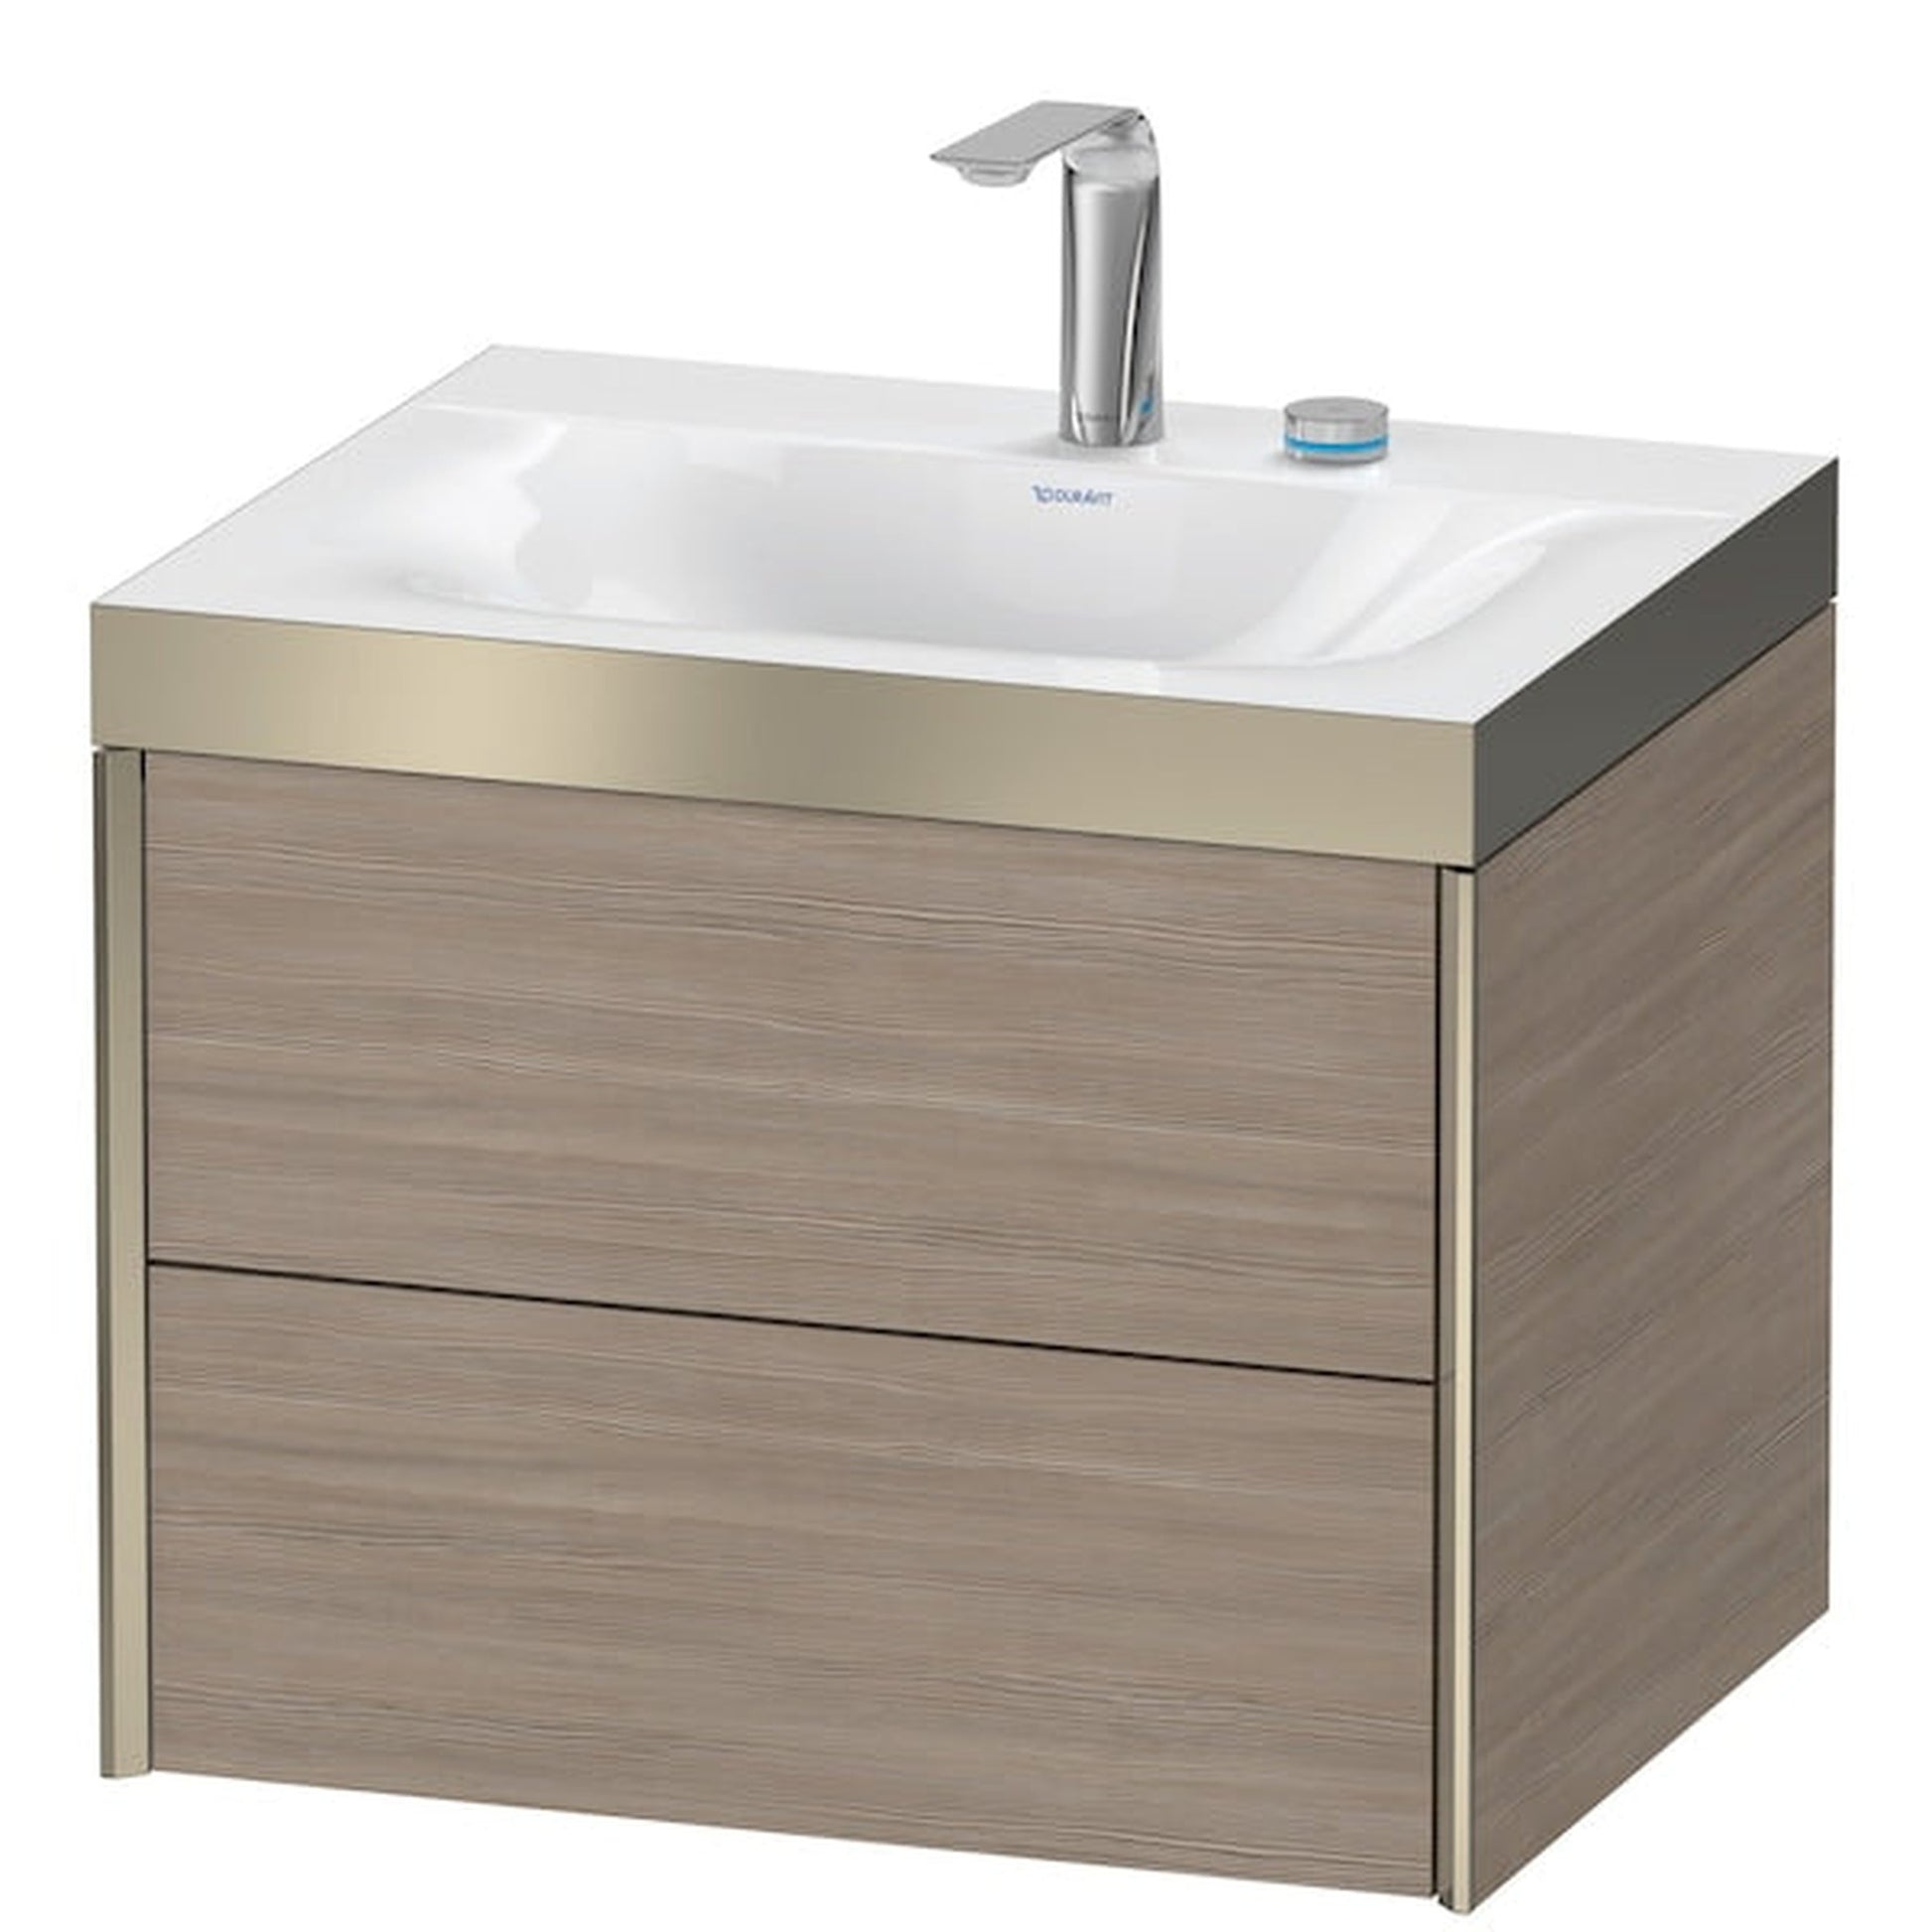 Duravit Xviu 24" x 20" x 19" Two Drawer C-Bonded Wall-Mount Vanity Kit With Two Tap Holes, Silver Pine (XV4614EB131P)